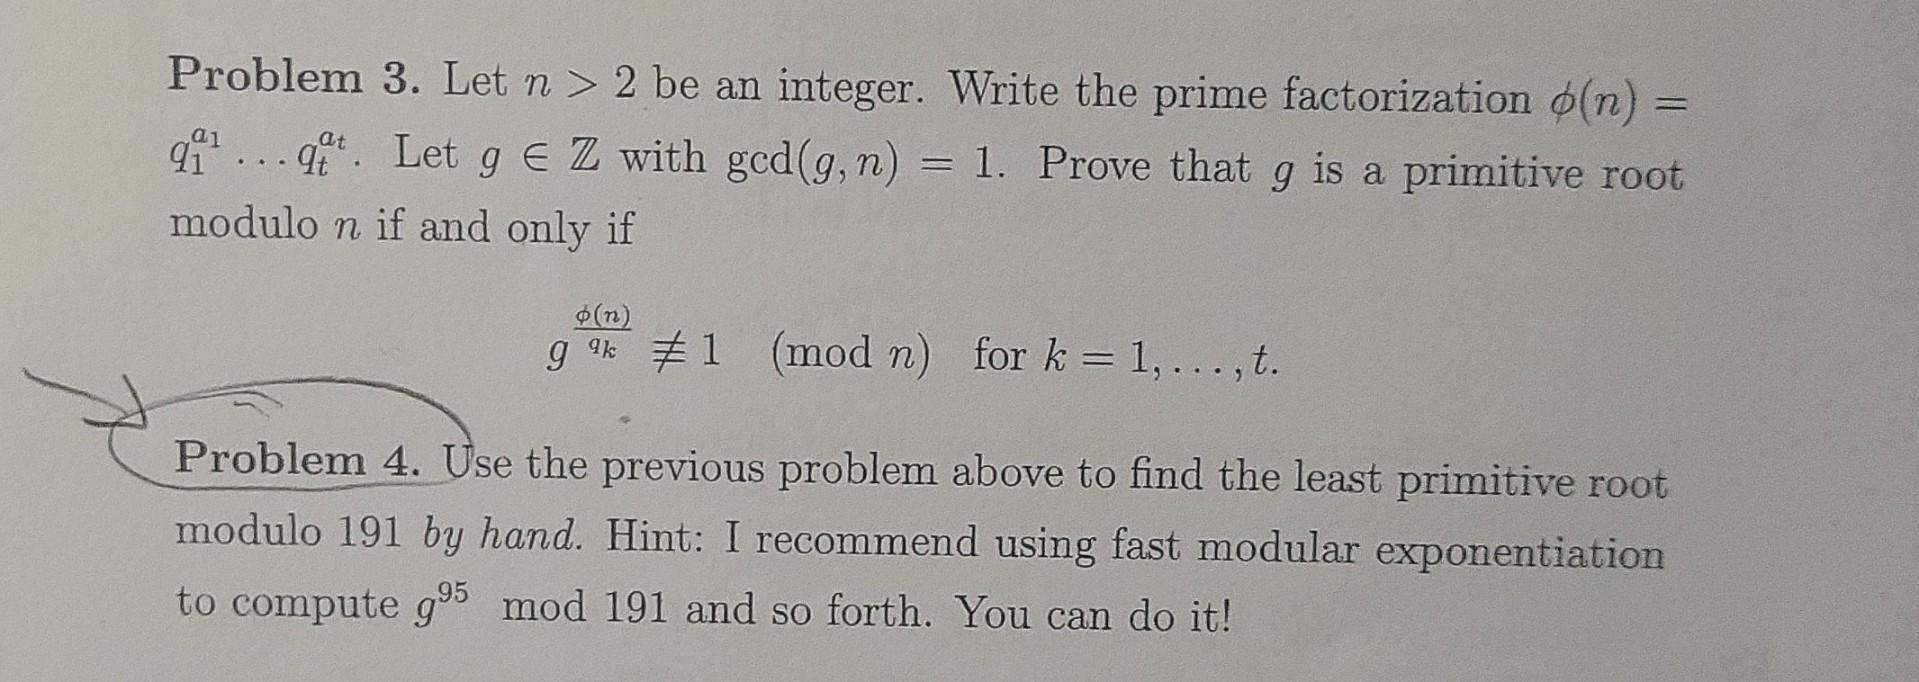 Problem 3. Let n > 2 be an integer. Write the prime factorization o(n) =qil... Let g e Z with ged(g, n) = 1. Prove that g is